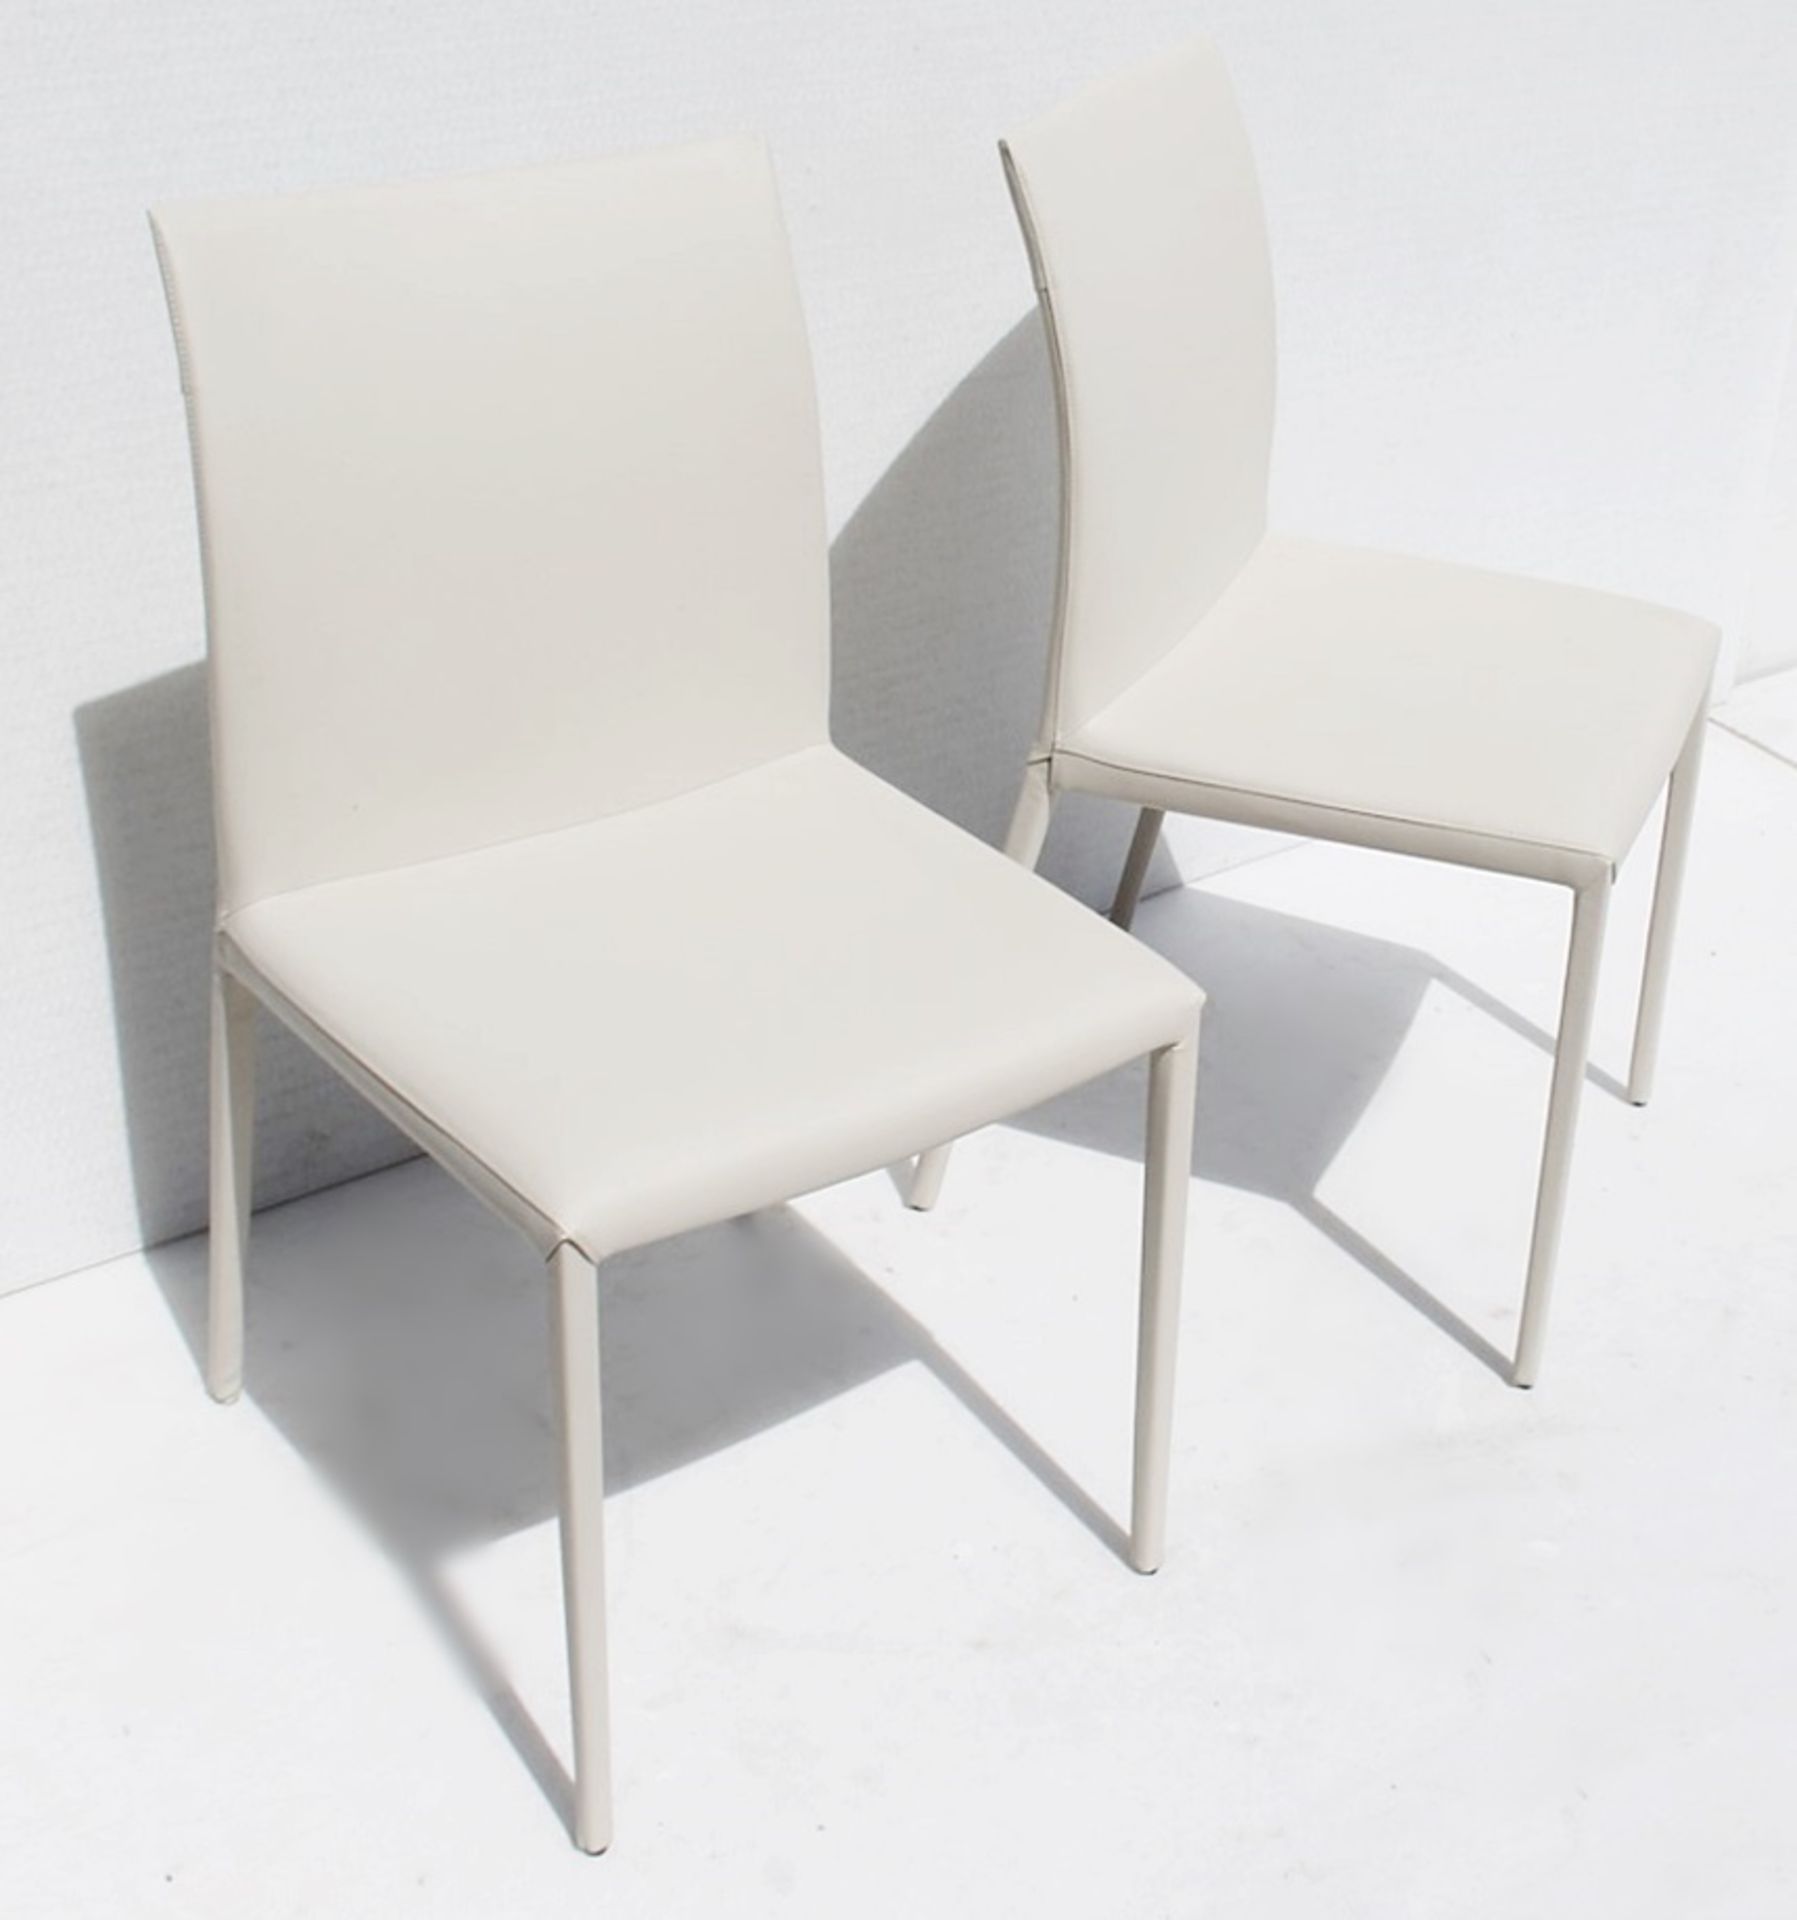 Pair Of CATELLAN 'Norma' Designer Italian Leather Chairs With Curved Backs In A Pale Taupe - Image 6 of 6